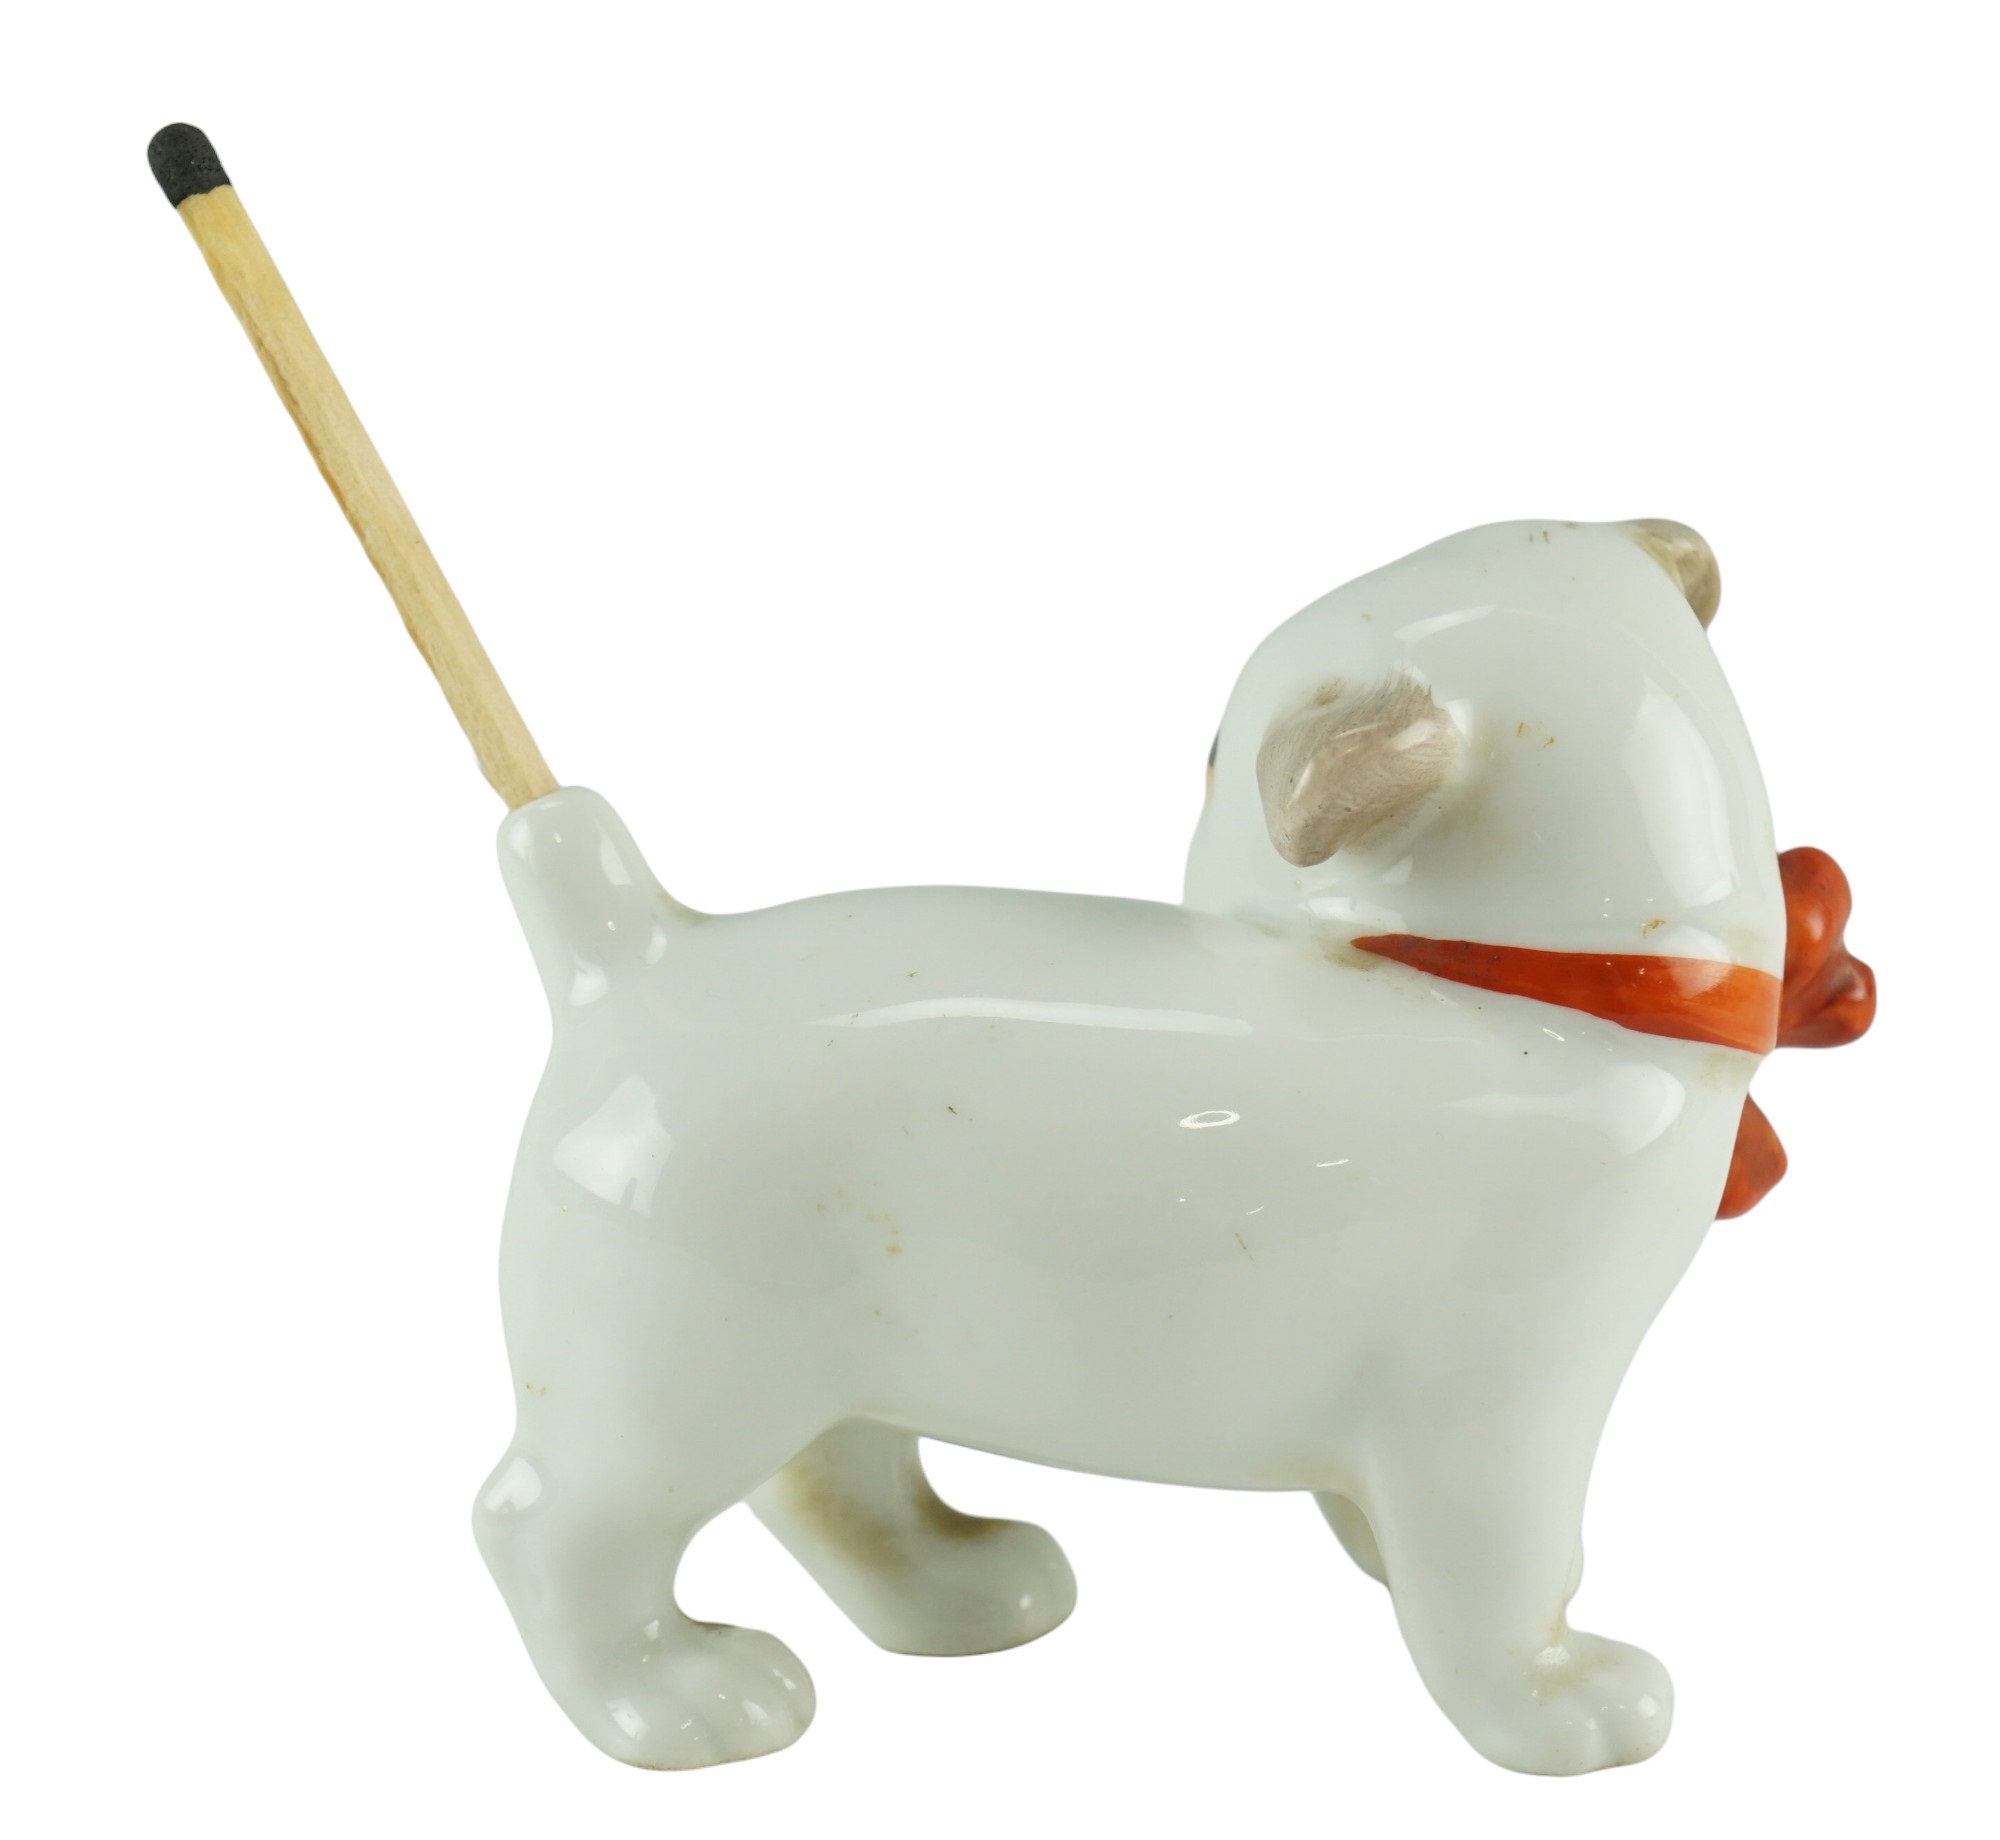 An early 20th Century Pfeffer Porcelain go-to-bed or similar dog figurine, 7.5 x 6 cm - Image 2 of 3